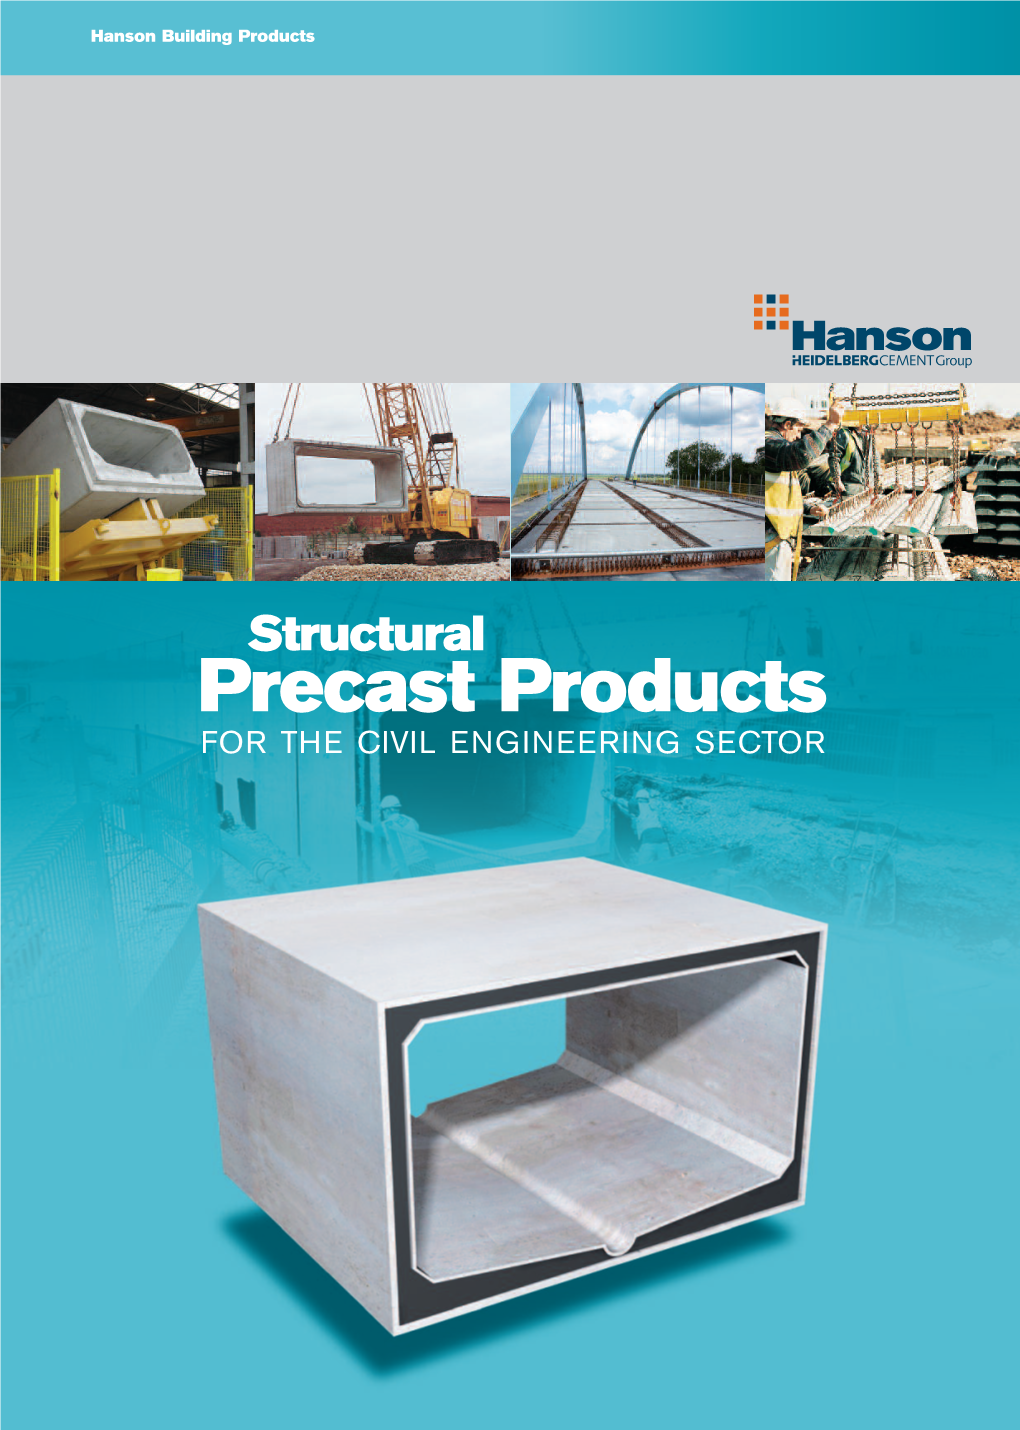 Box Culverts Structural Precast Concrete Solutions and System Overview 4 Products for Civil Engineering, Commercial Benefits 5 and Domestic Applications